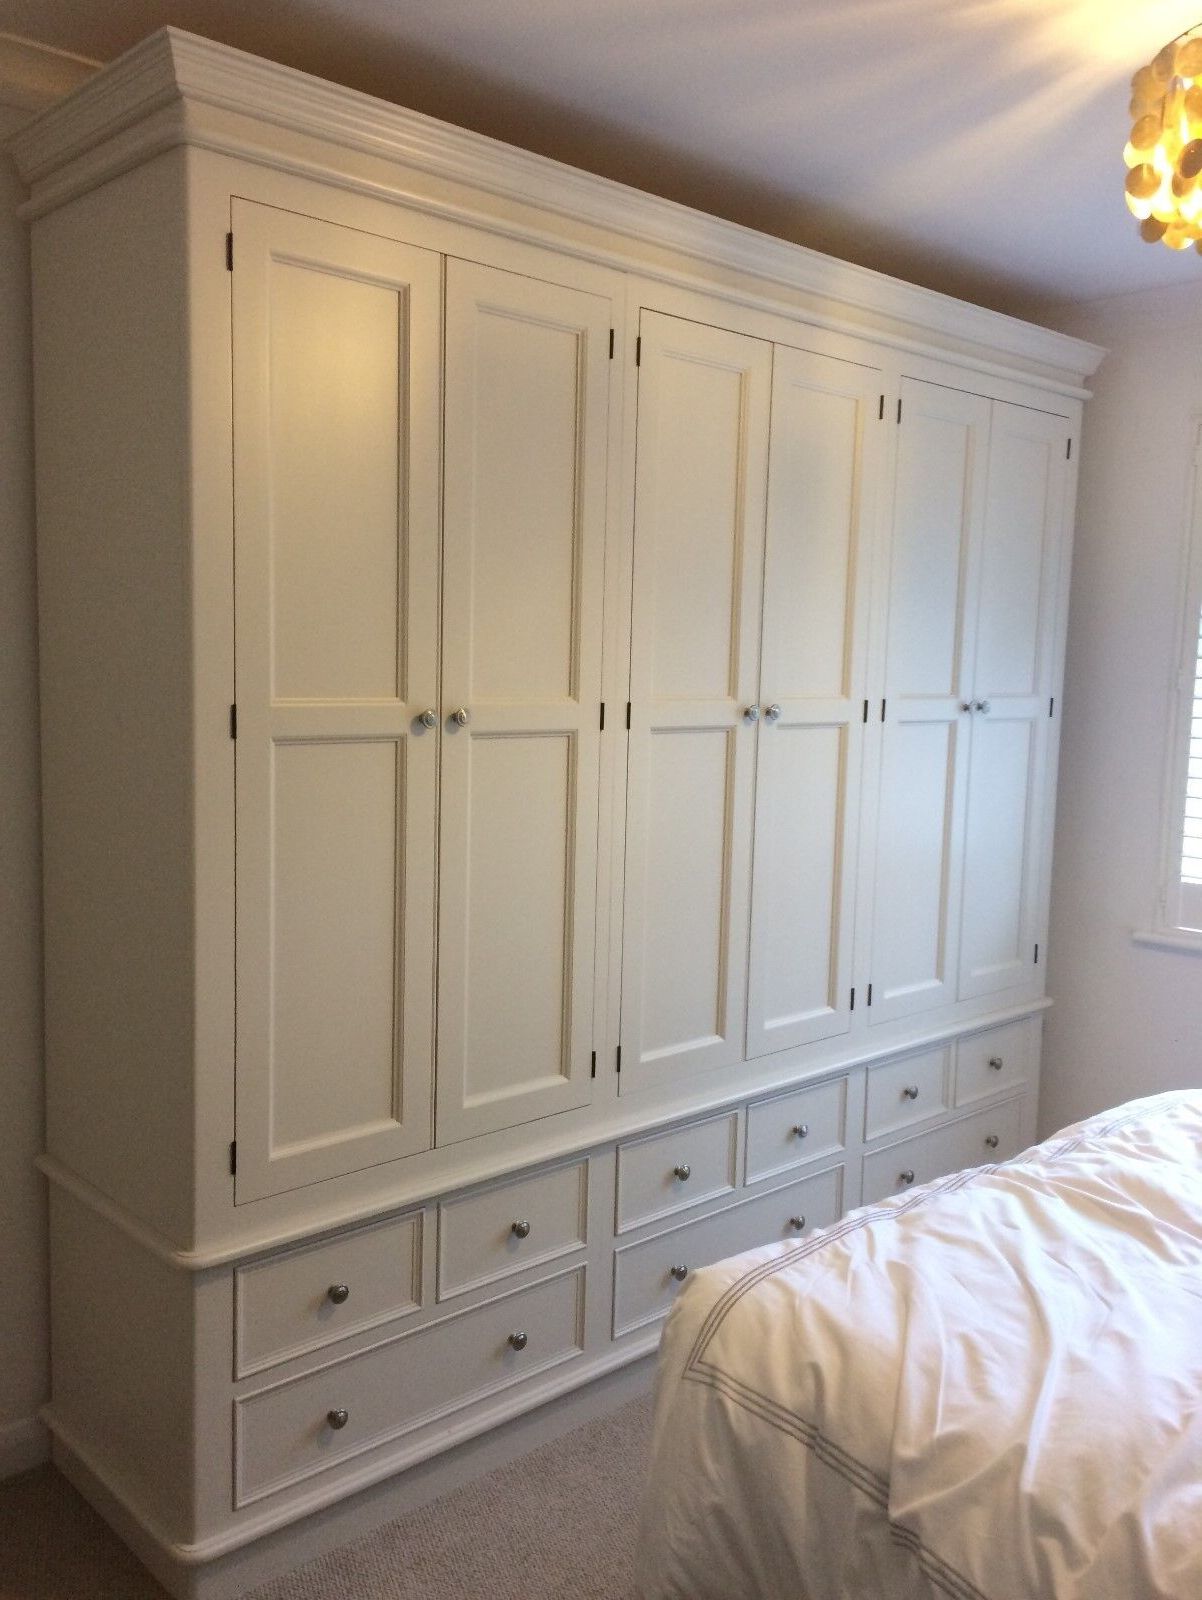 Wardrobe – Painted 6 Door 9 Drawer – Victorian With Plinth Style | Ebay Throughout 6 Door Wardrobes (View 9 of 20)